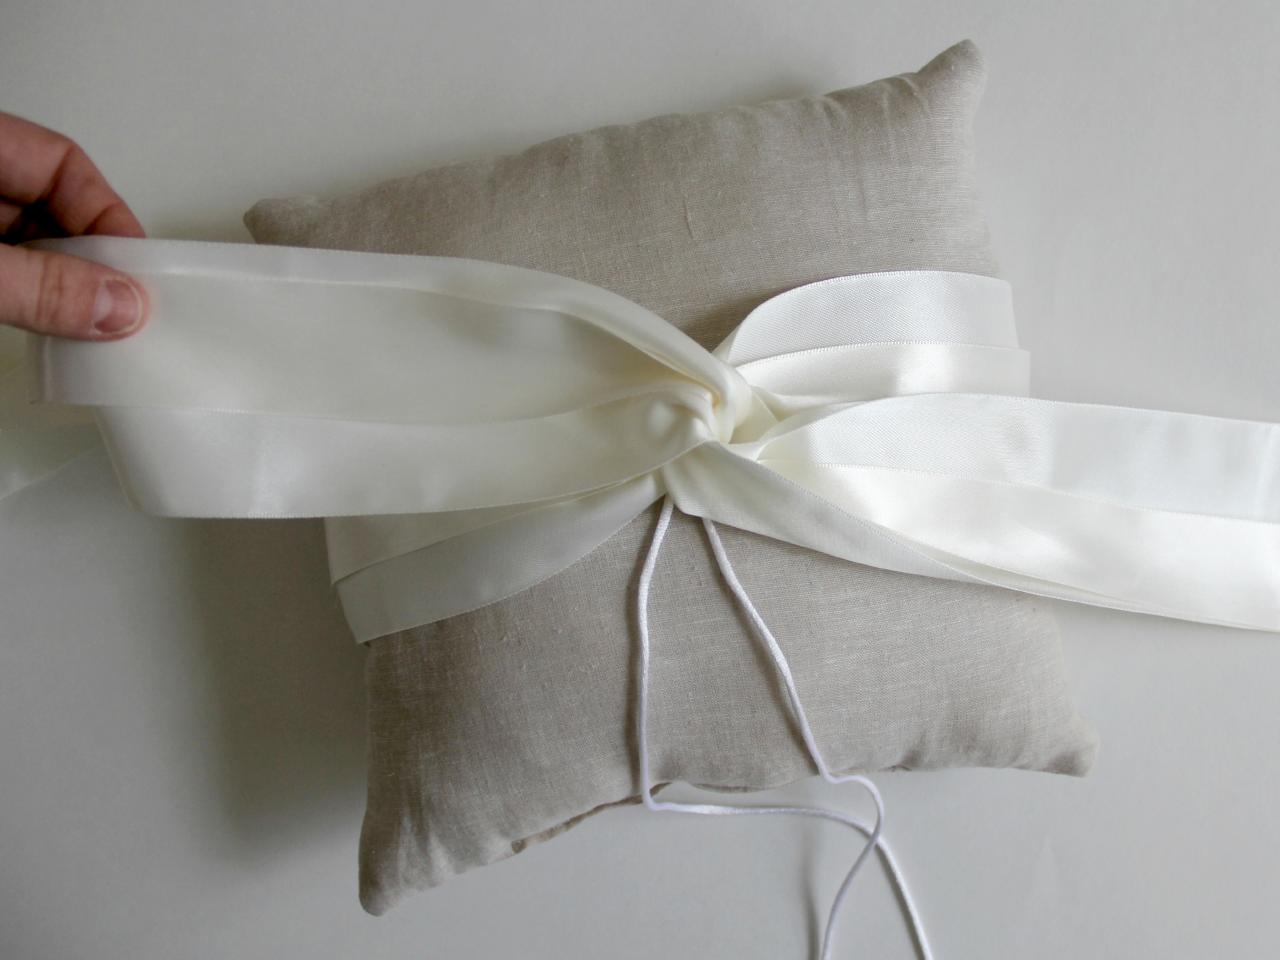 sewing patterns for wedding ring pillows